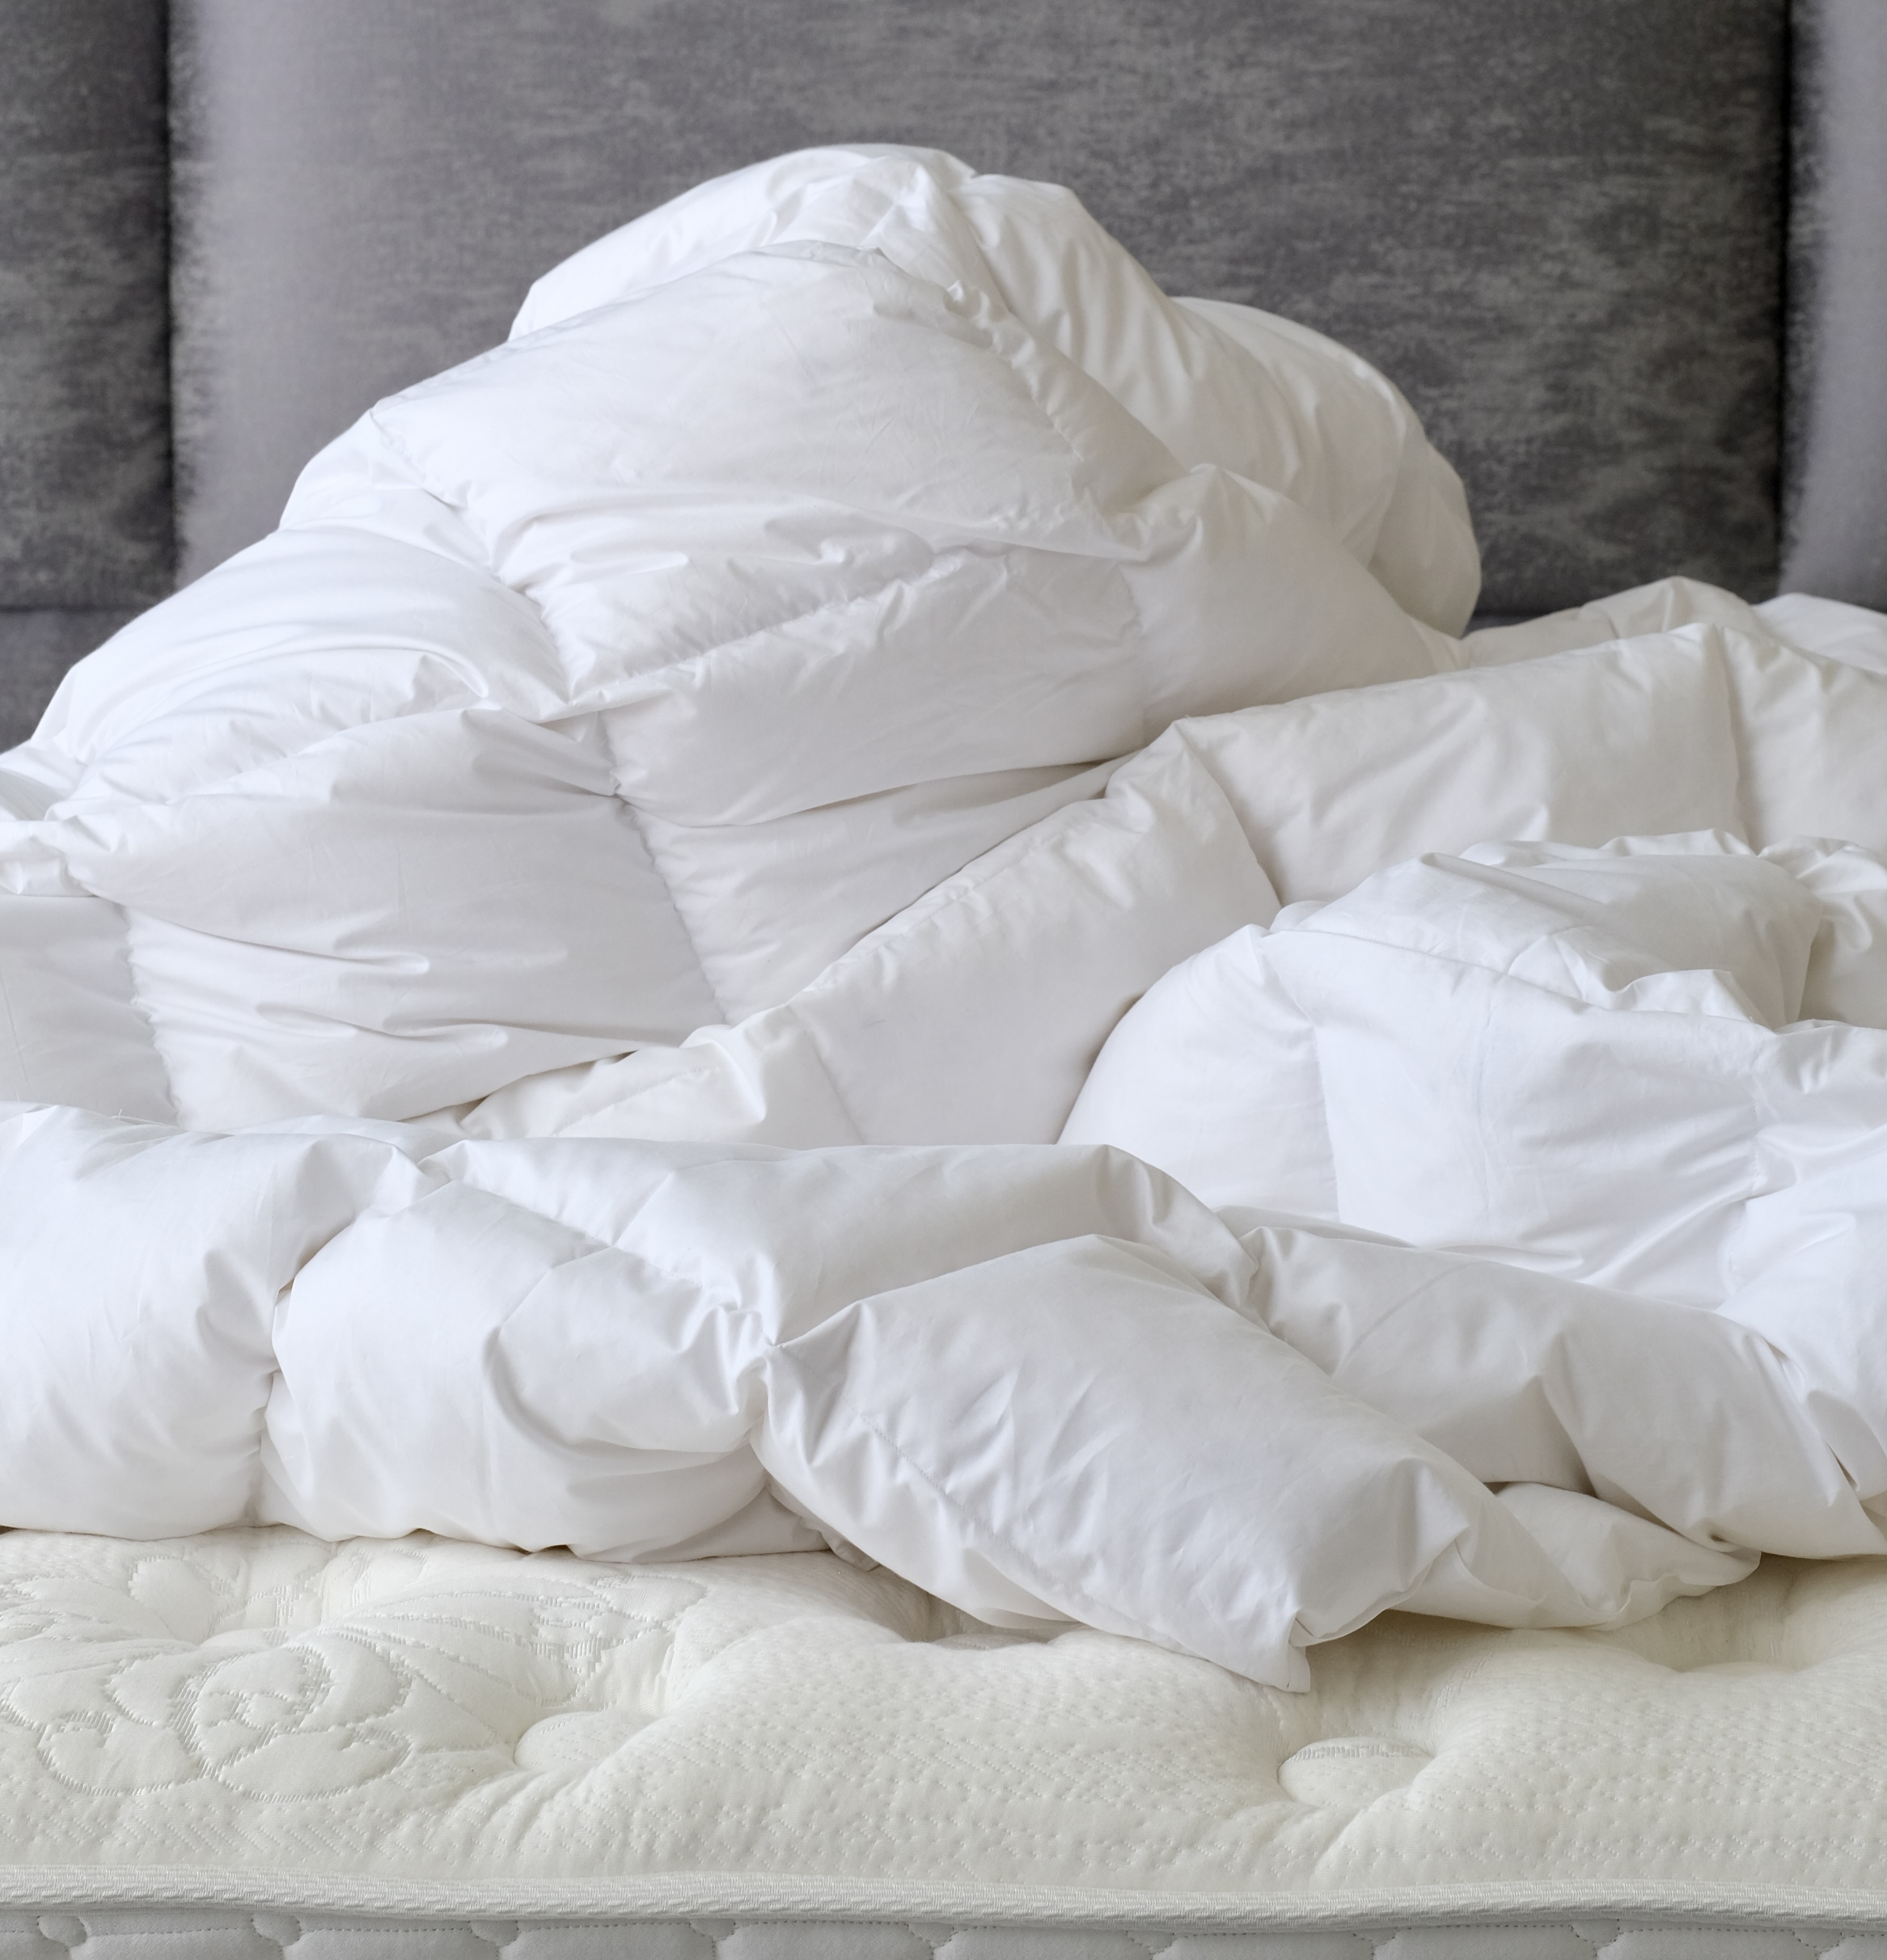 Exclusive Royal Comfort down pillows and duvets